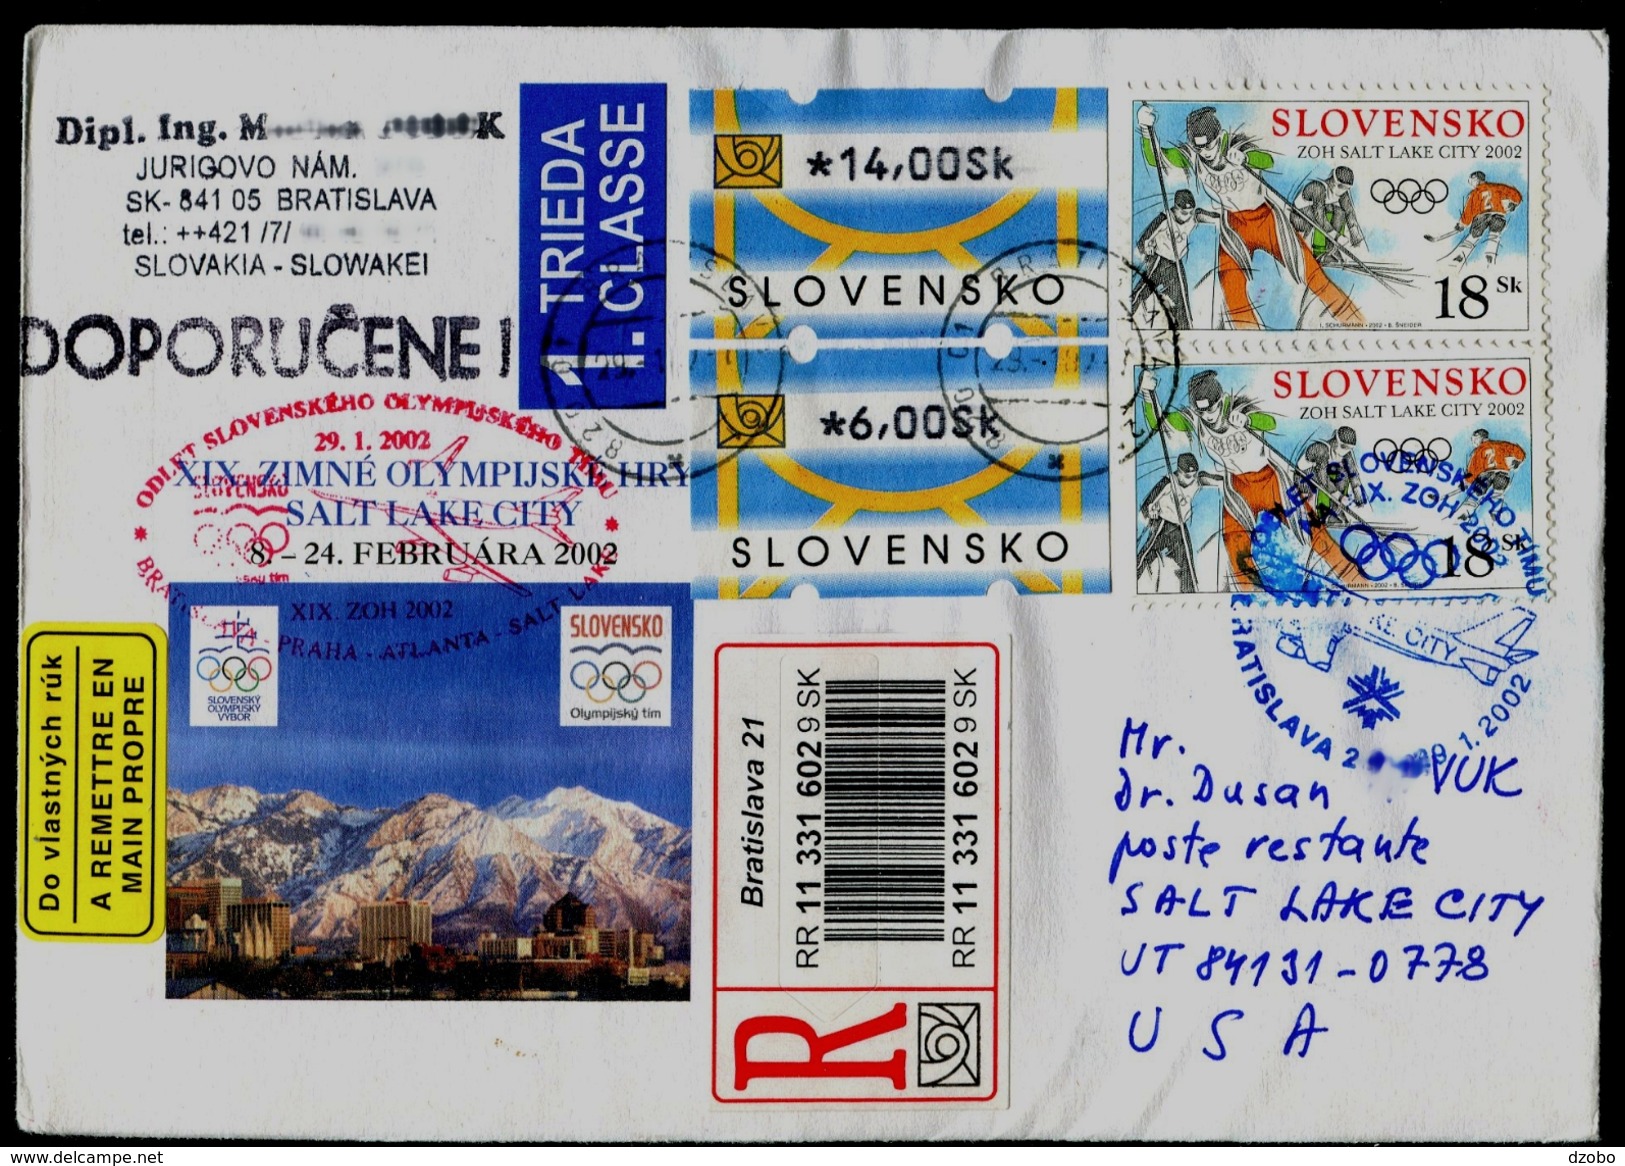 527-SLOVAKIA R-Brief-letter SALT LAKE CITY Olympiade-Olympia Abfahrt Team-departure Of The Team Commemorative Stamp 2002 - Invierno 2002: Salt Lake City - Paralympic